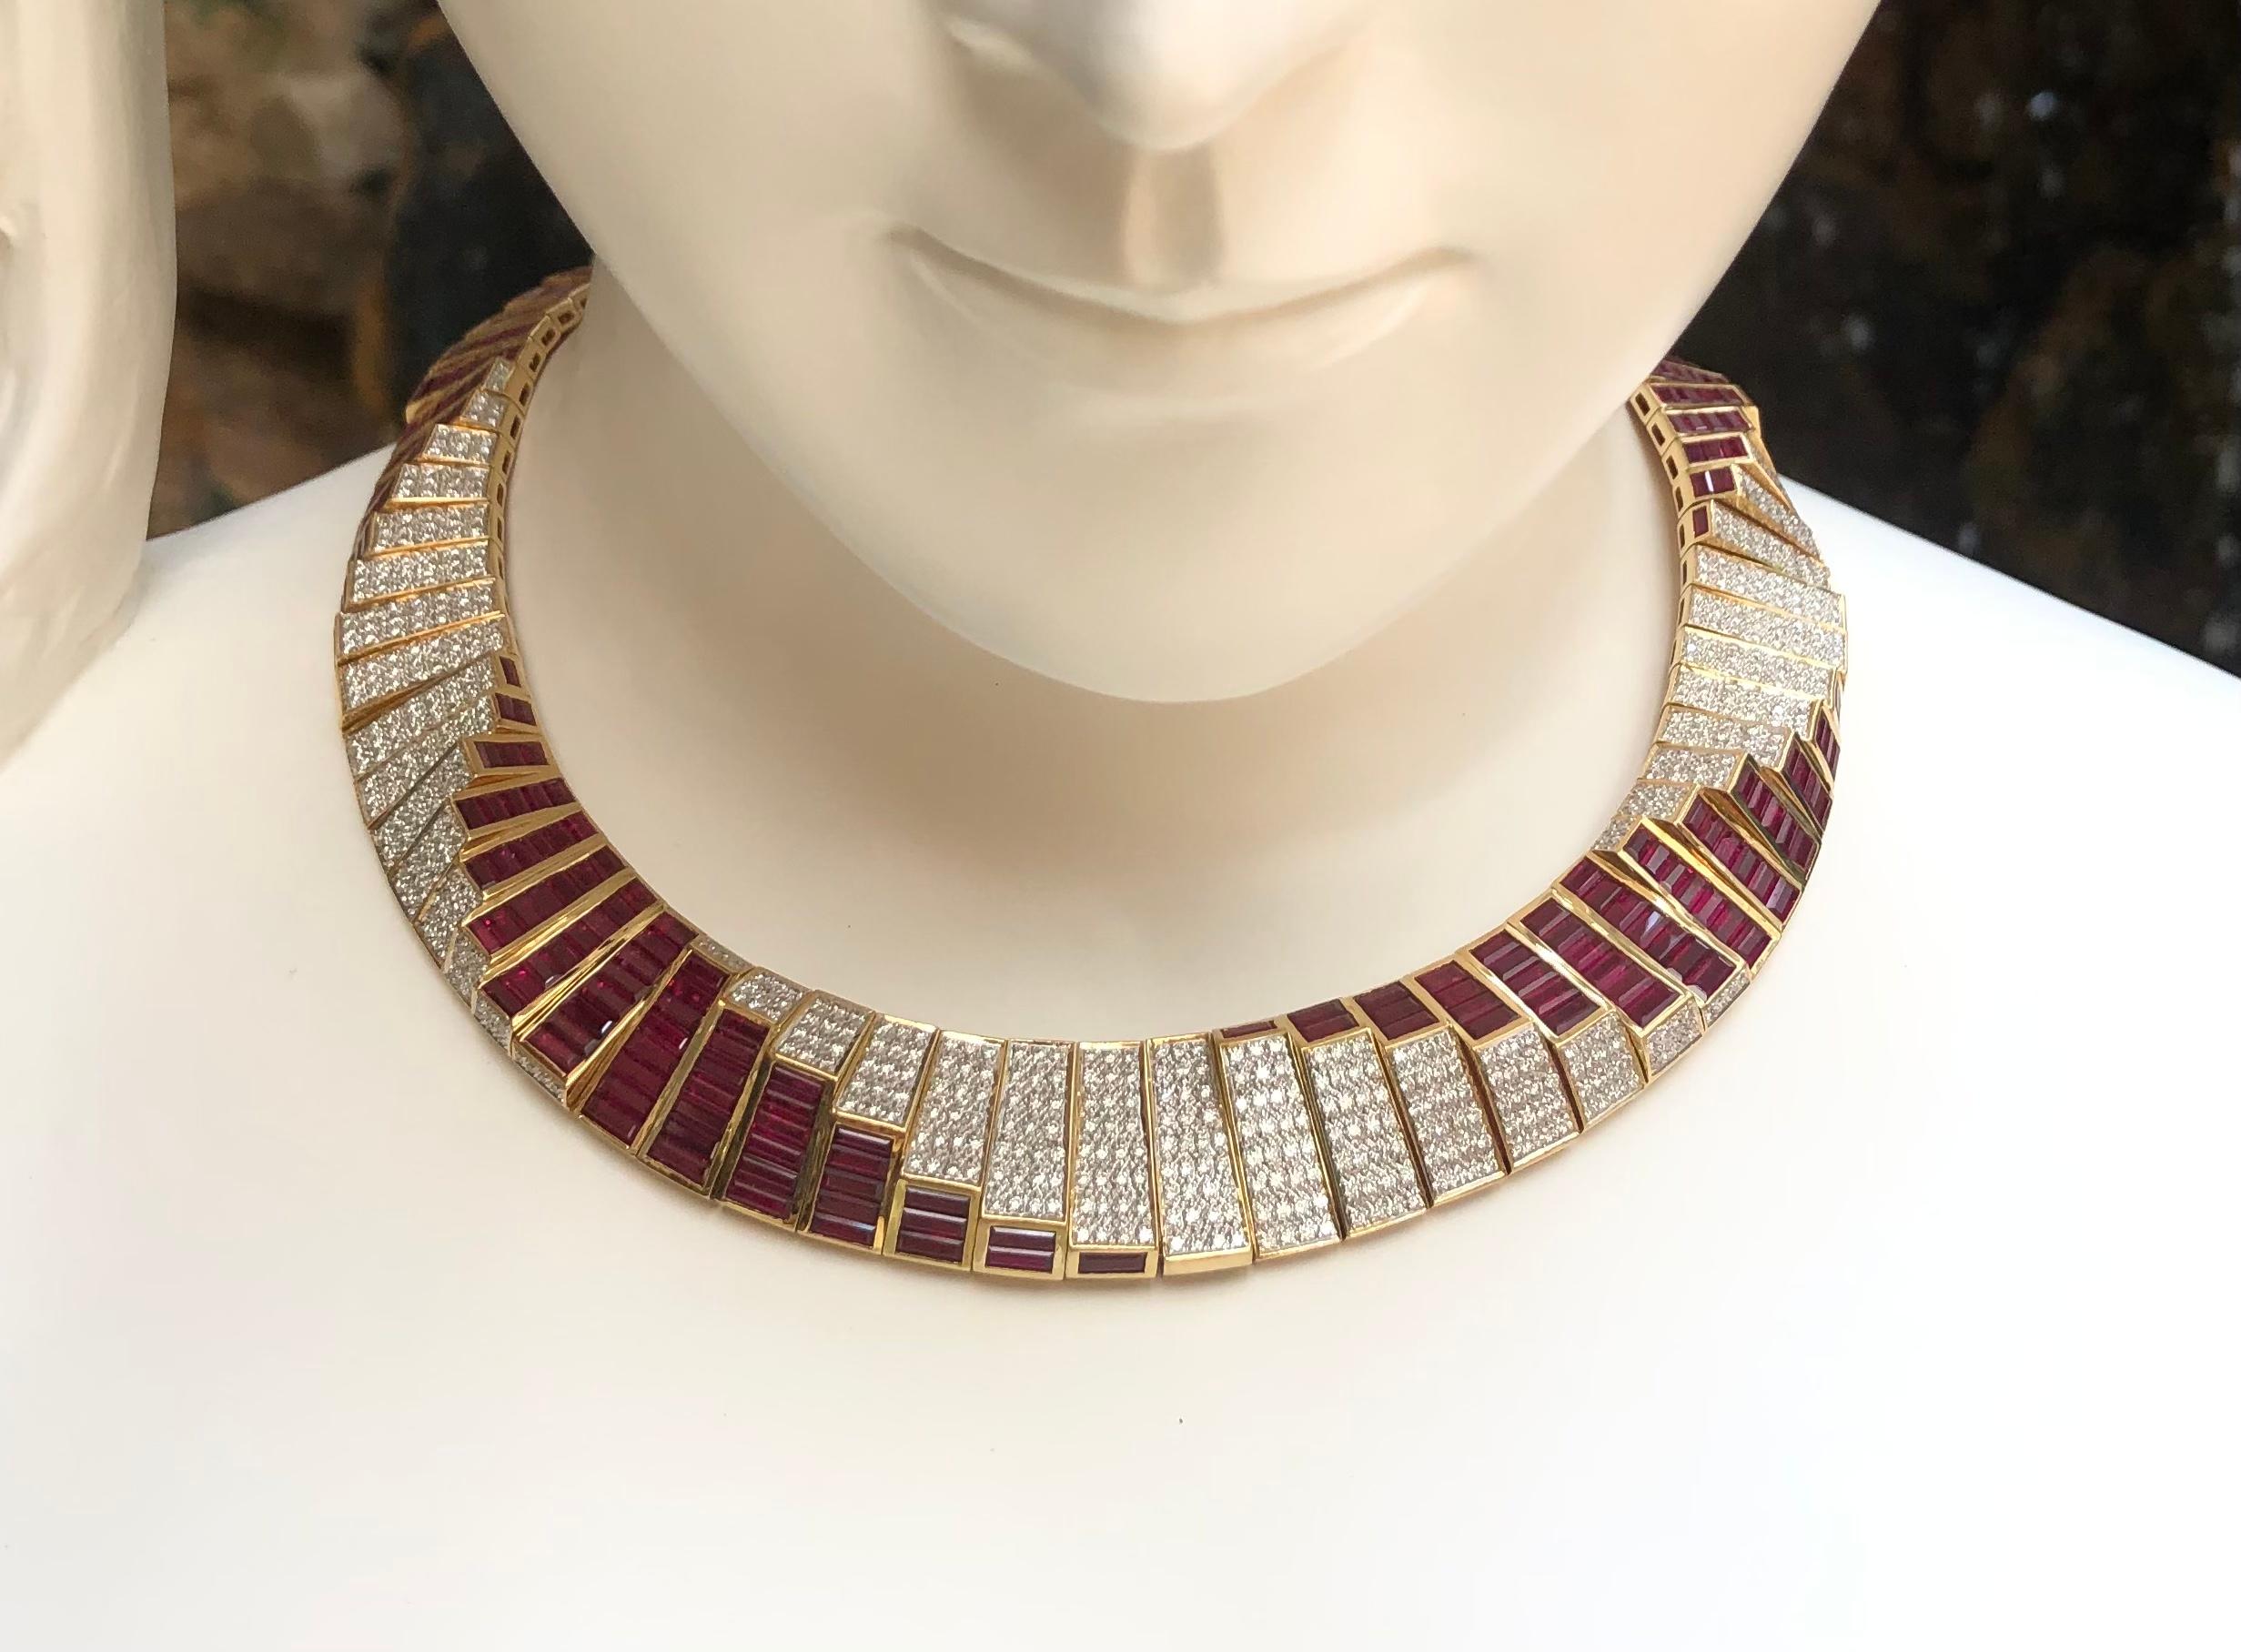 Ruby 42.20 carats with Diamond 10.0 carats Necklace set in 18 Karat Gold Settings

Width:  1.7 cm 
Length: 43.4 cm
Total Weight: 137.31 grams

